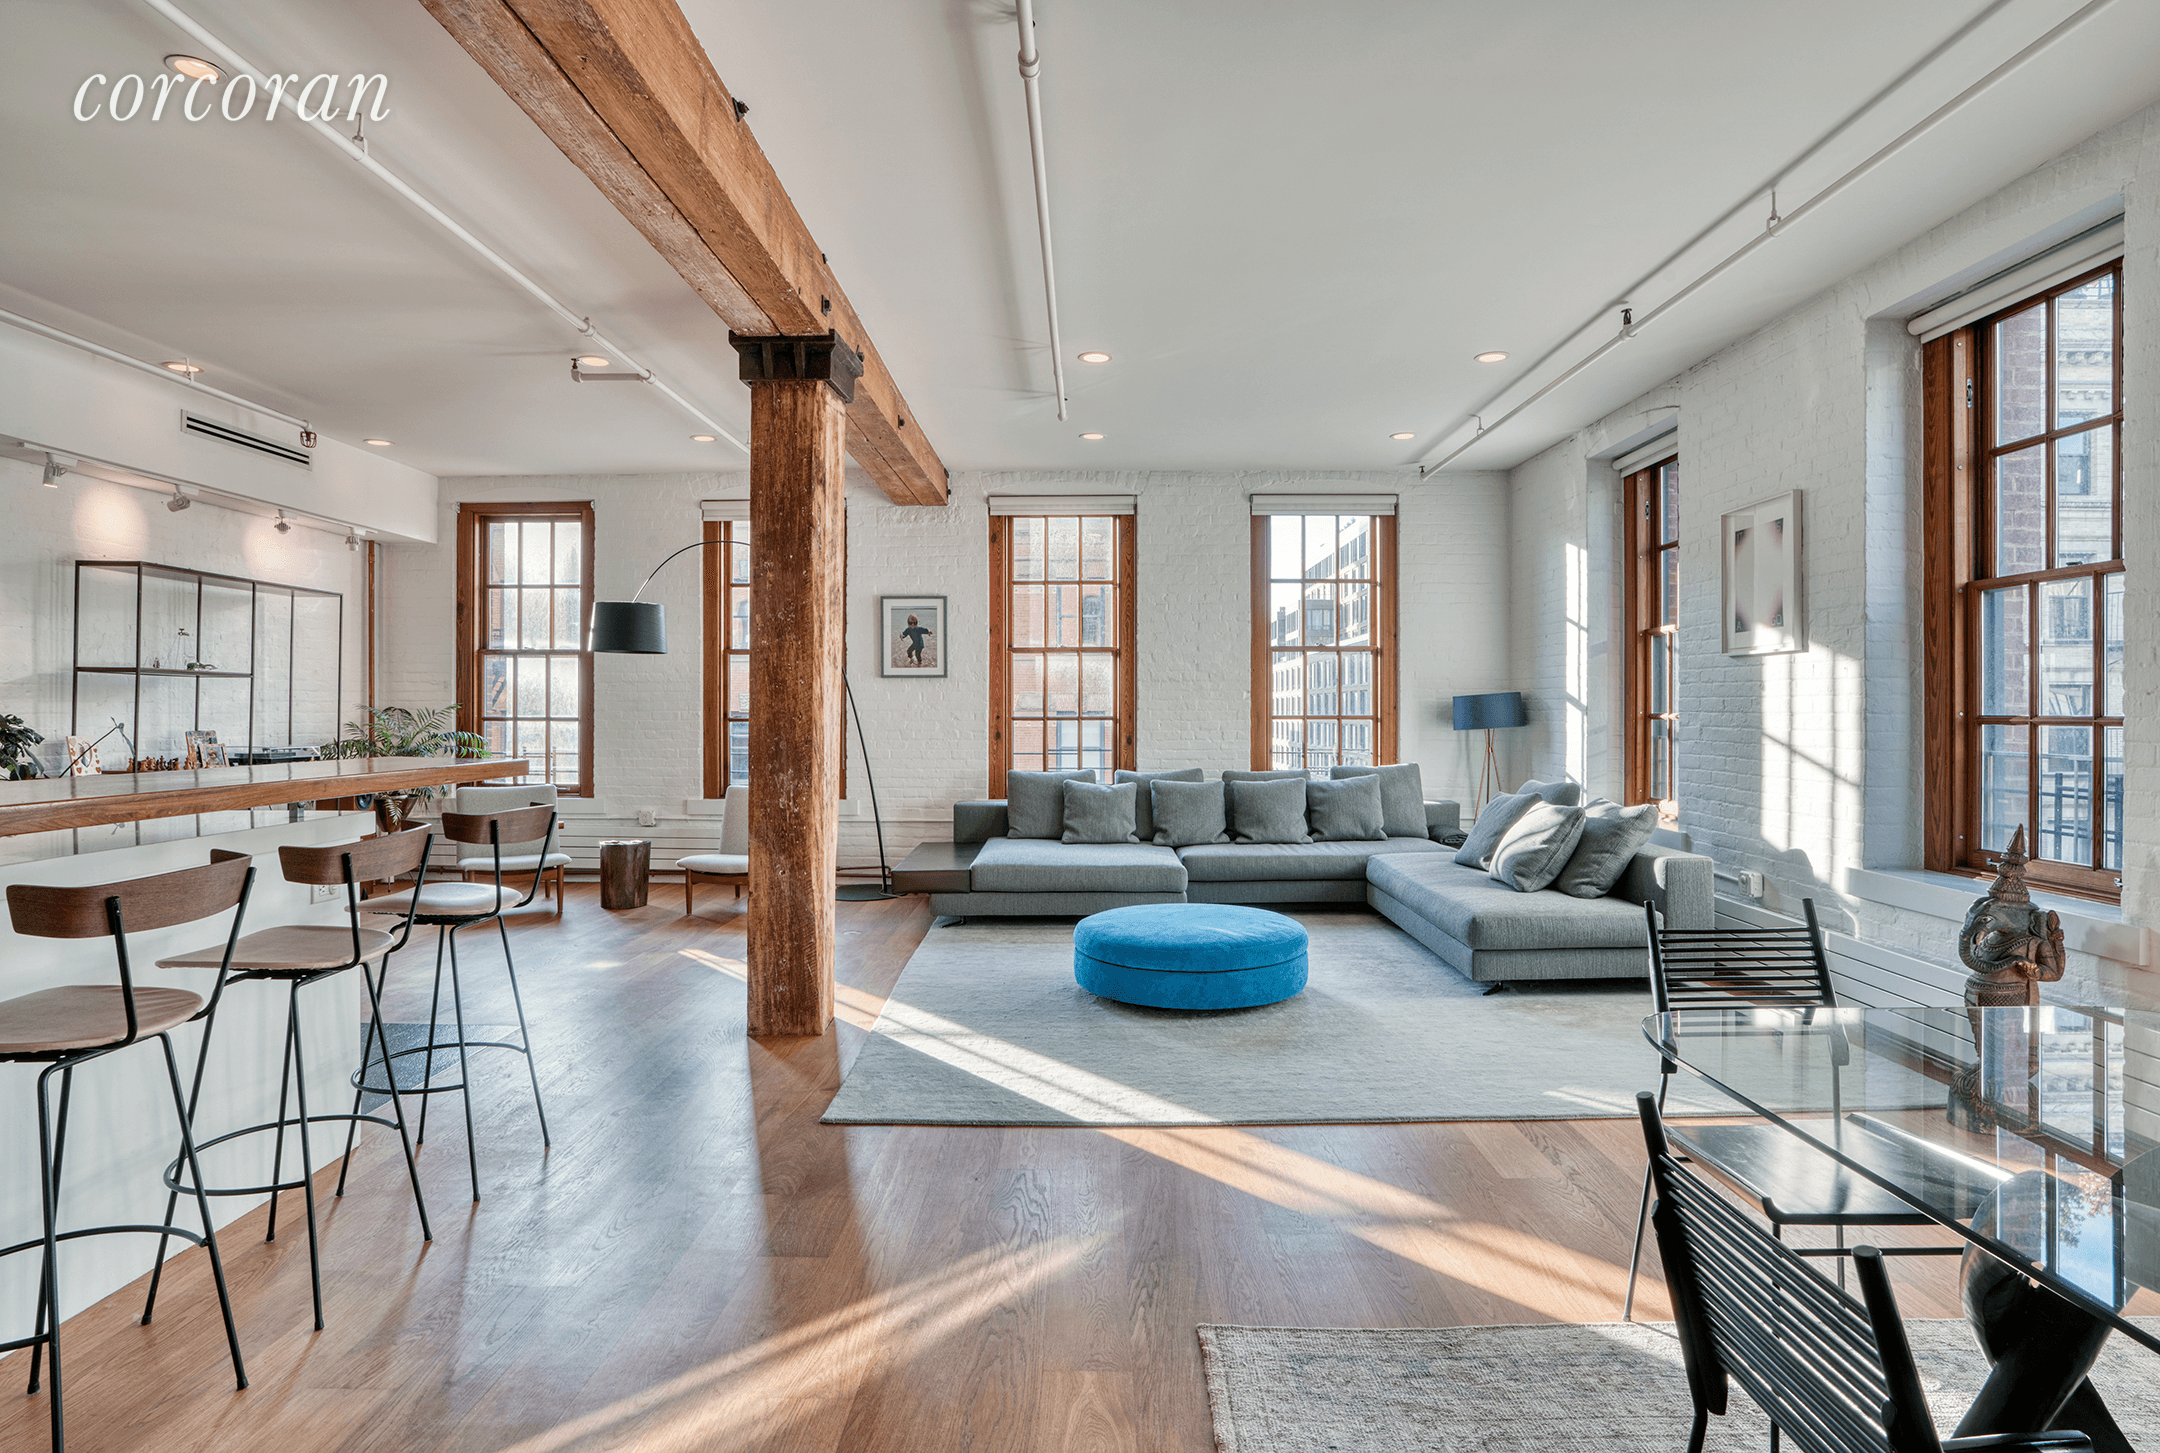 Tribeca loft lovers look no further than this truly stunning three bedroom, two bathroom home embracing 19th century bones and 21st century style.